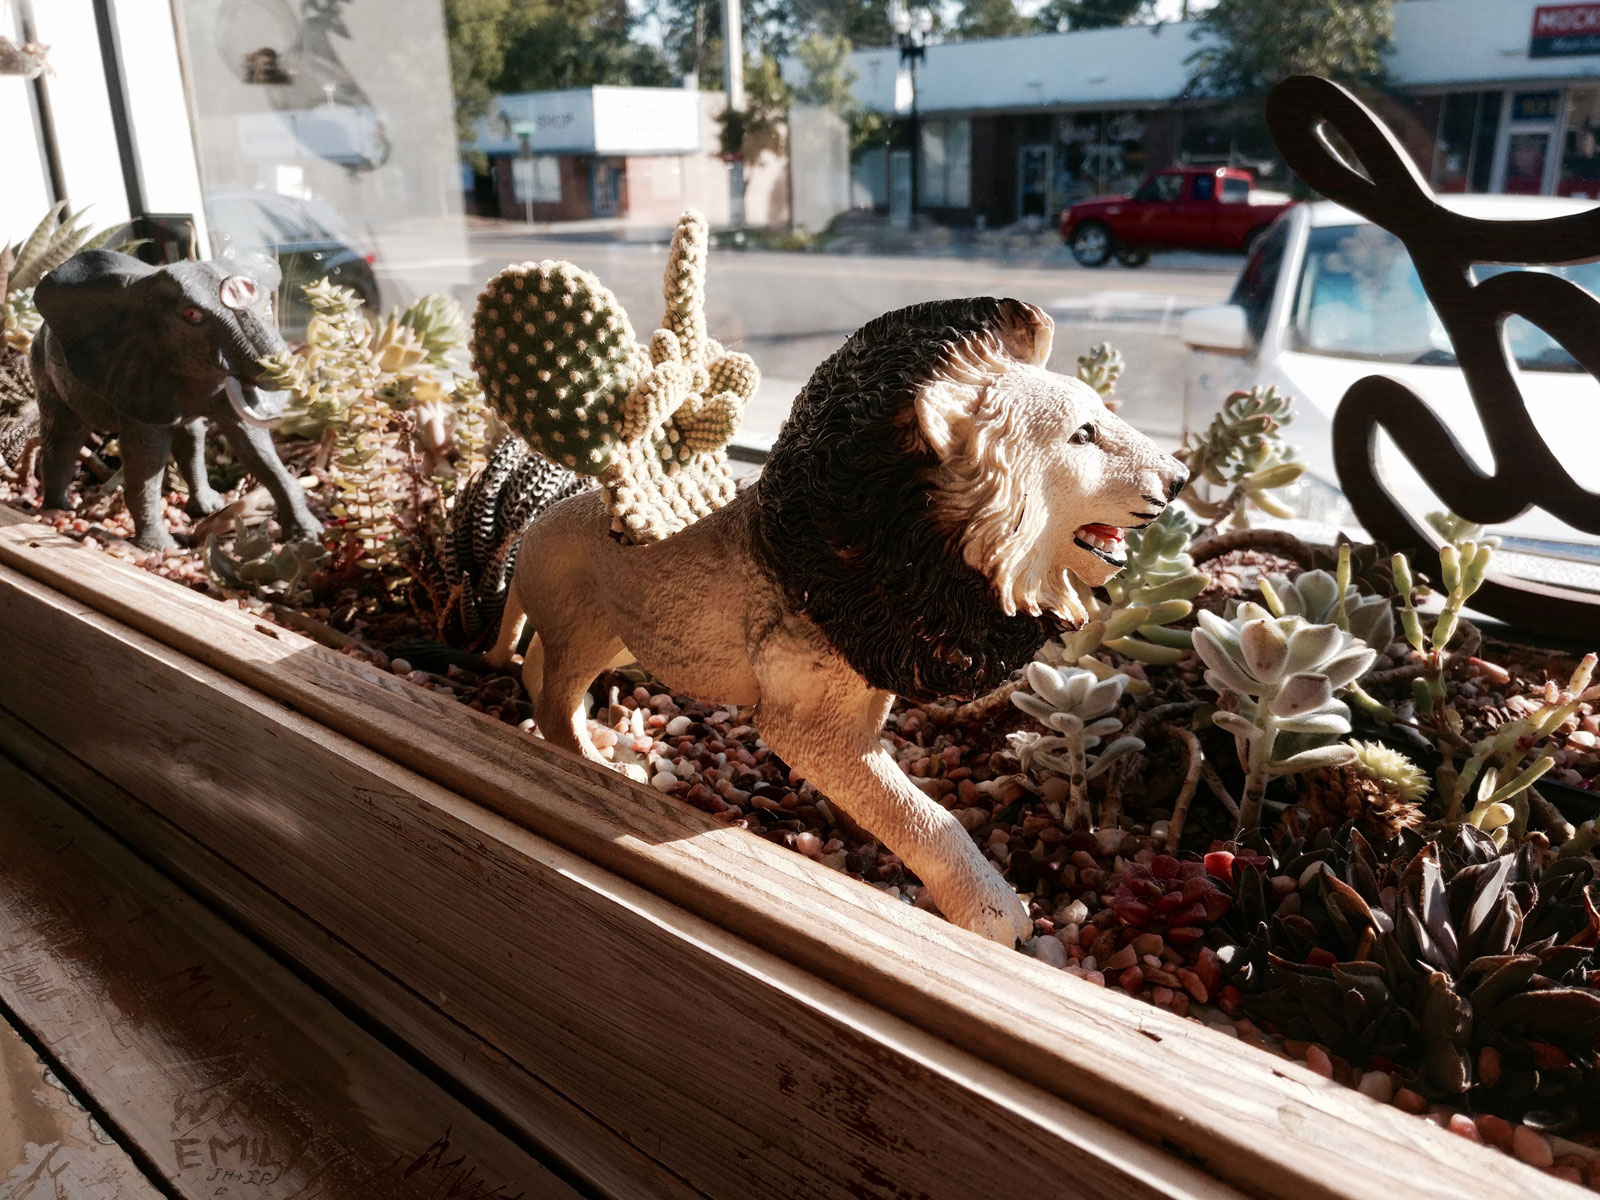 A display of plastic lions in a succulent bed at Vagabond Coffee